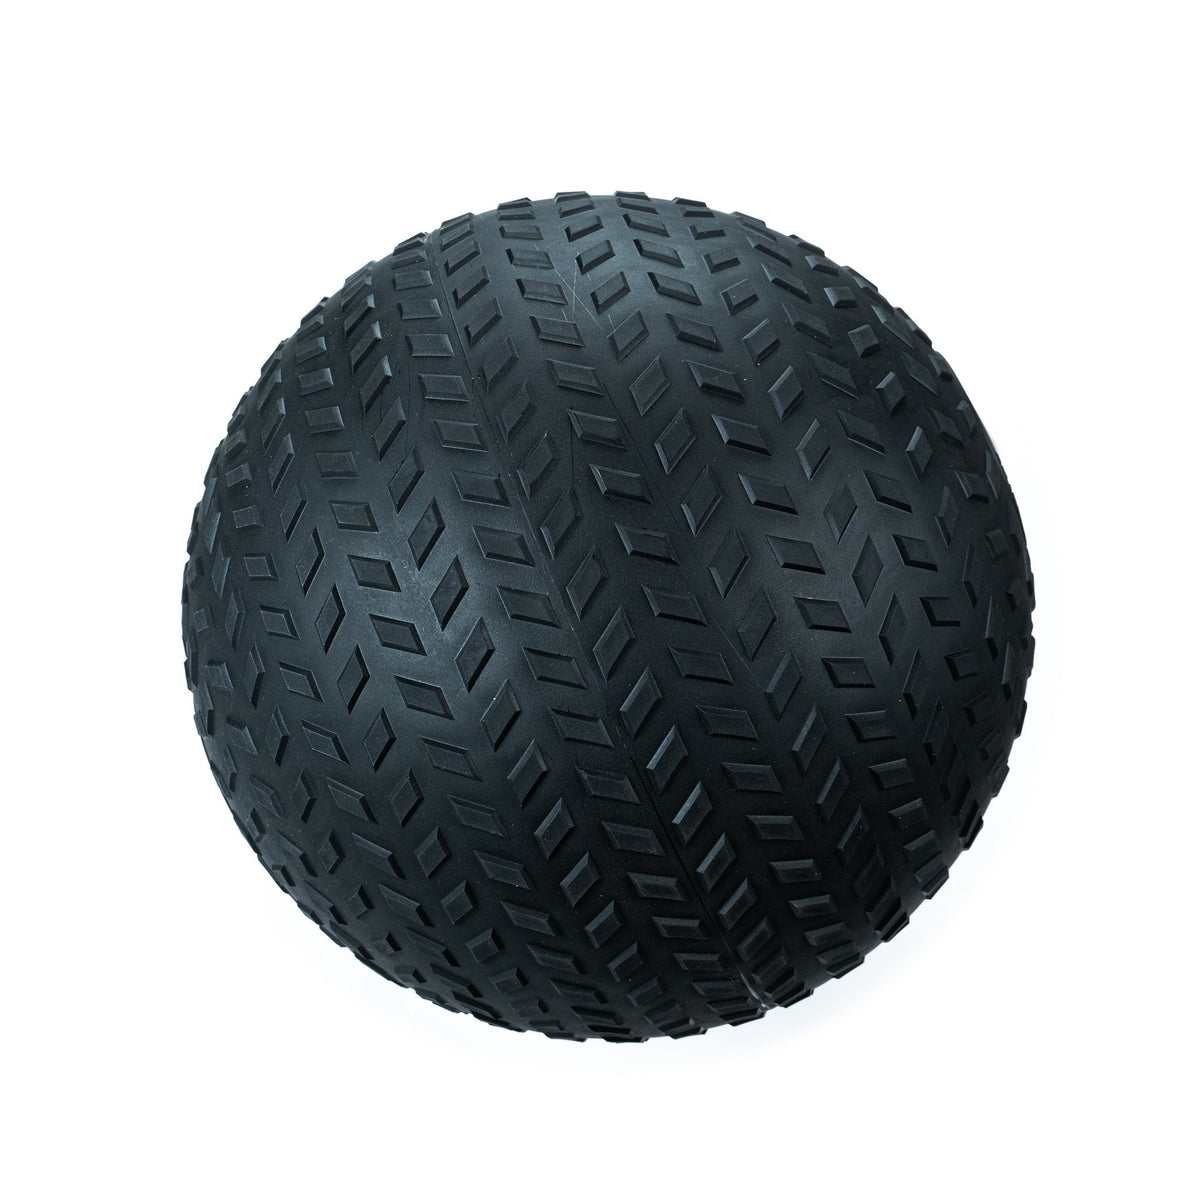 FitWay Equip. Max Grip Slam Ball - 50 Lbs 